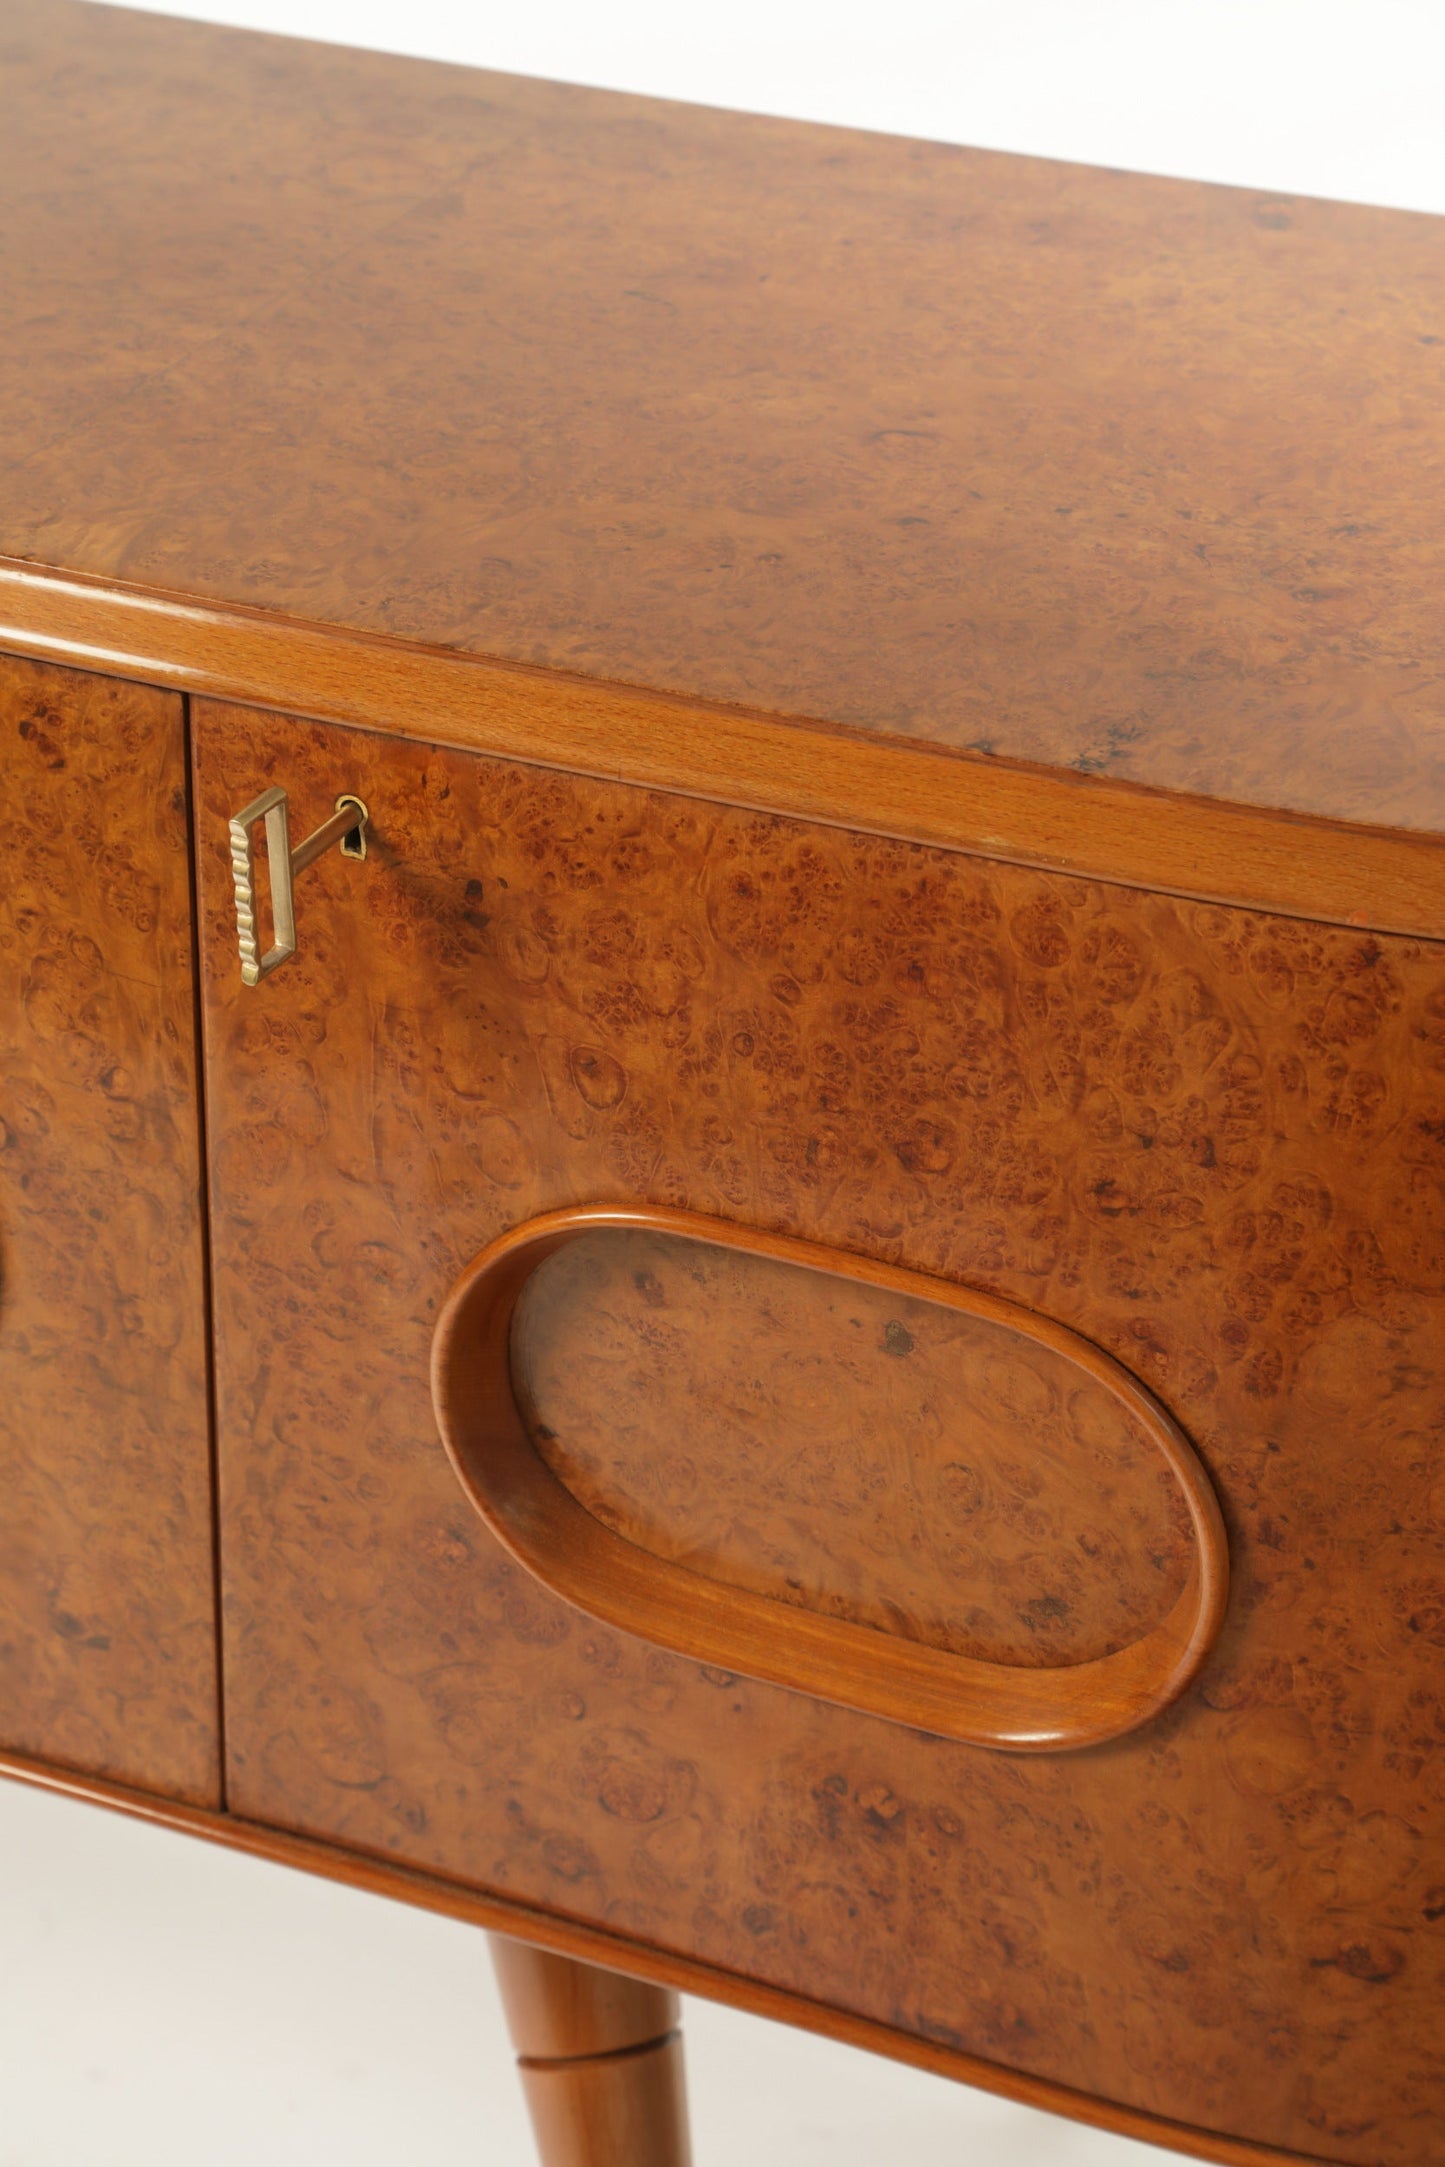 Fratelli Marelli sideboard from the 1940s